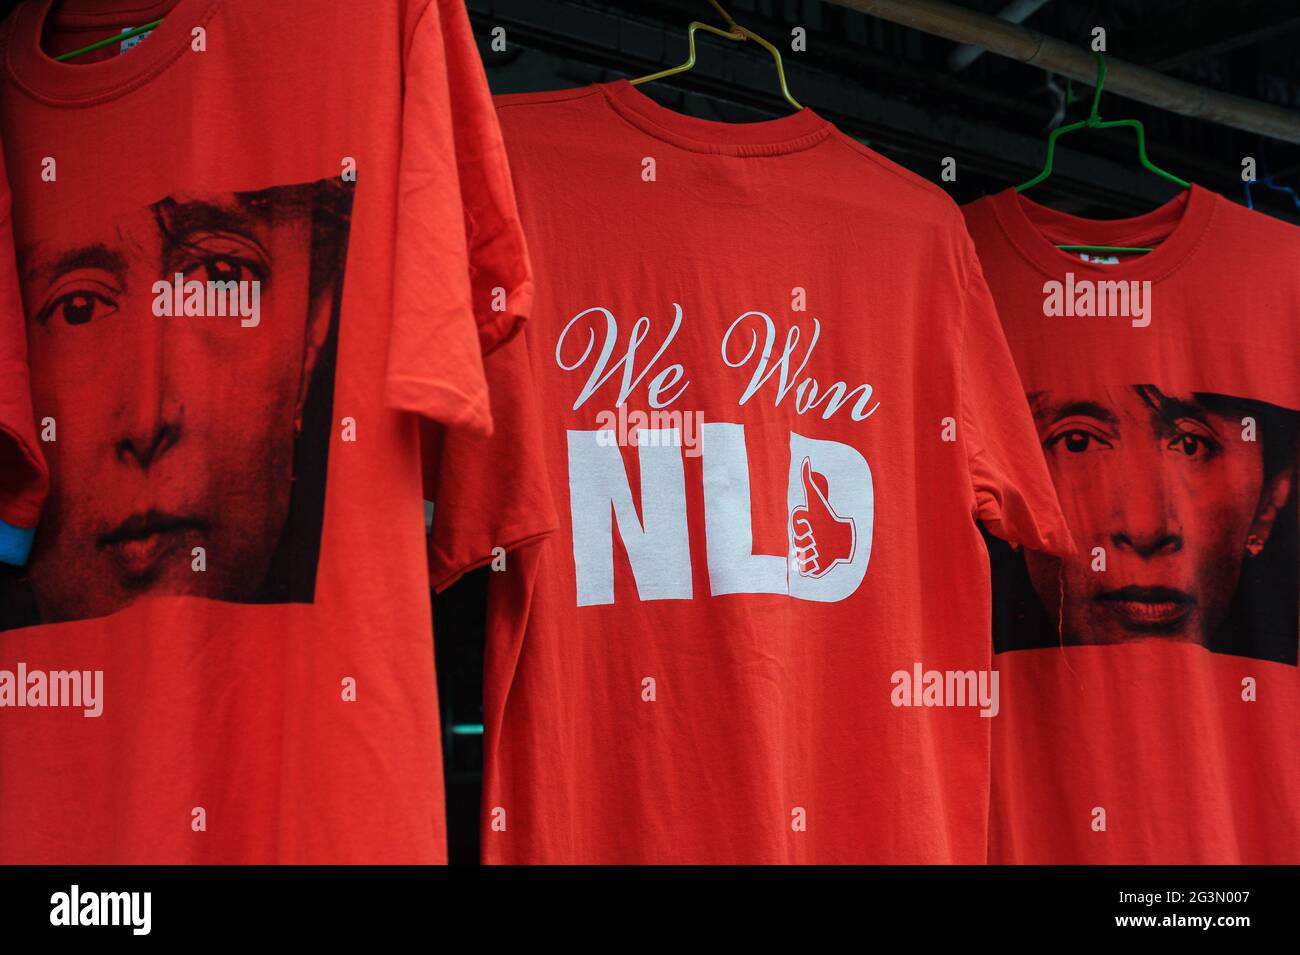 "10.11.2015, Yangon, , Myanmar - Red T-shirts bearing the image of Aung San Suu Kyi and the words 'We Won NLD' are for sale at a street stall in the f Stock Photo